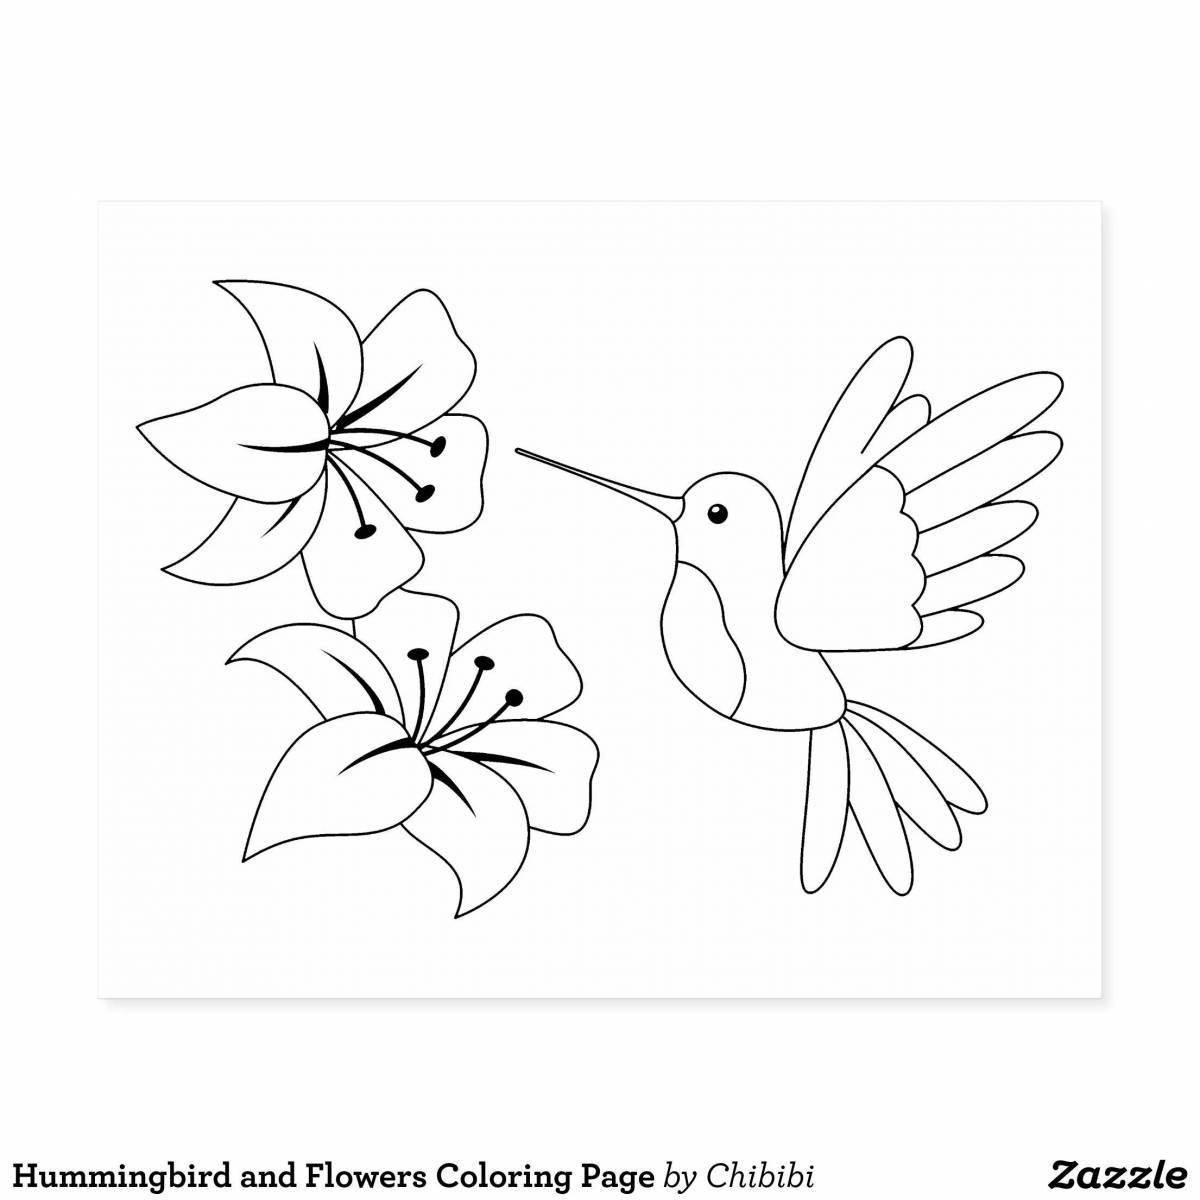 Funny hummingbird coloring book for kids